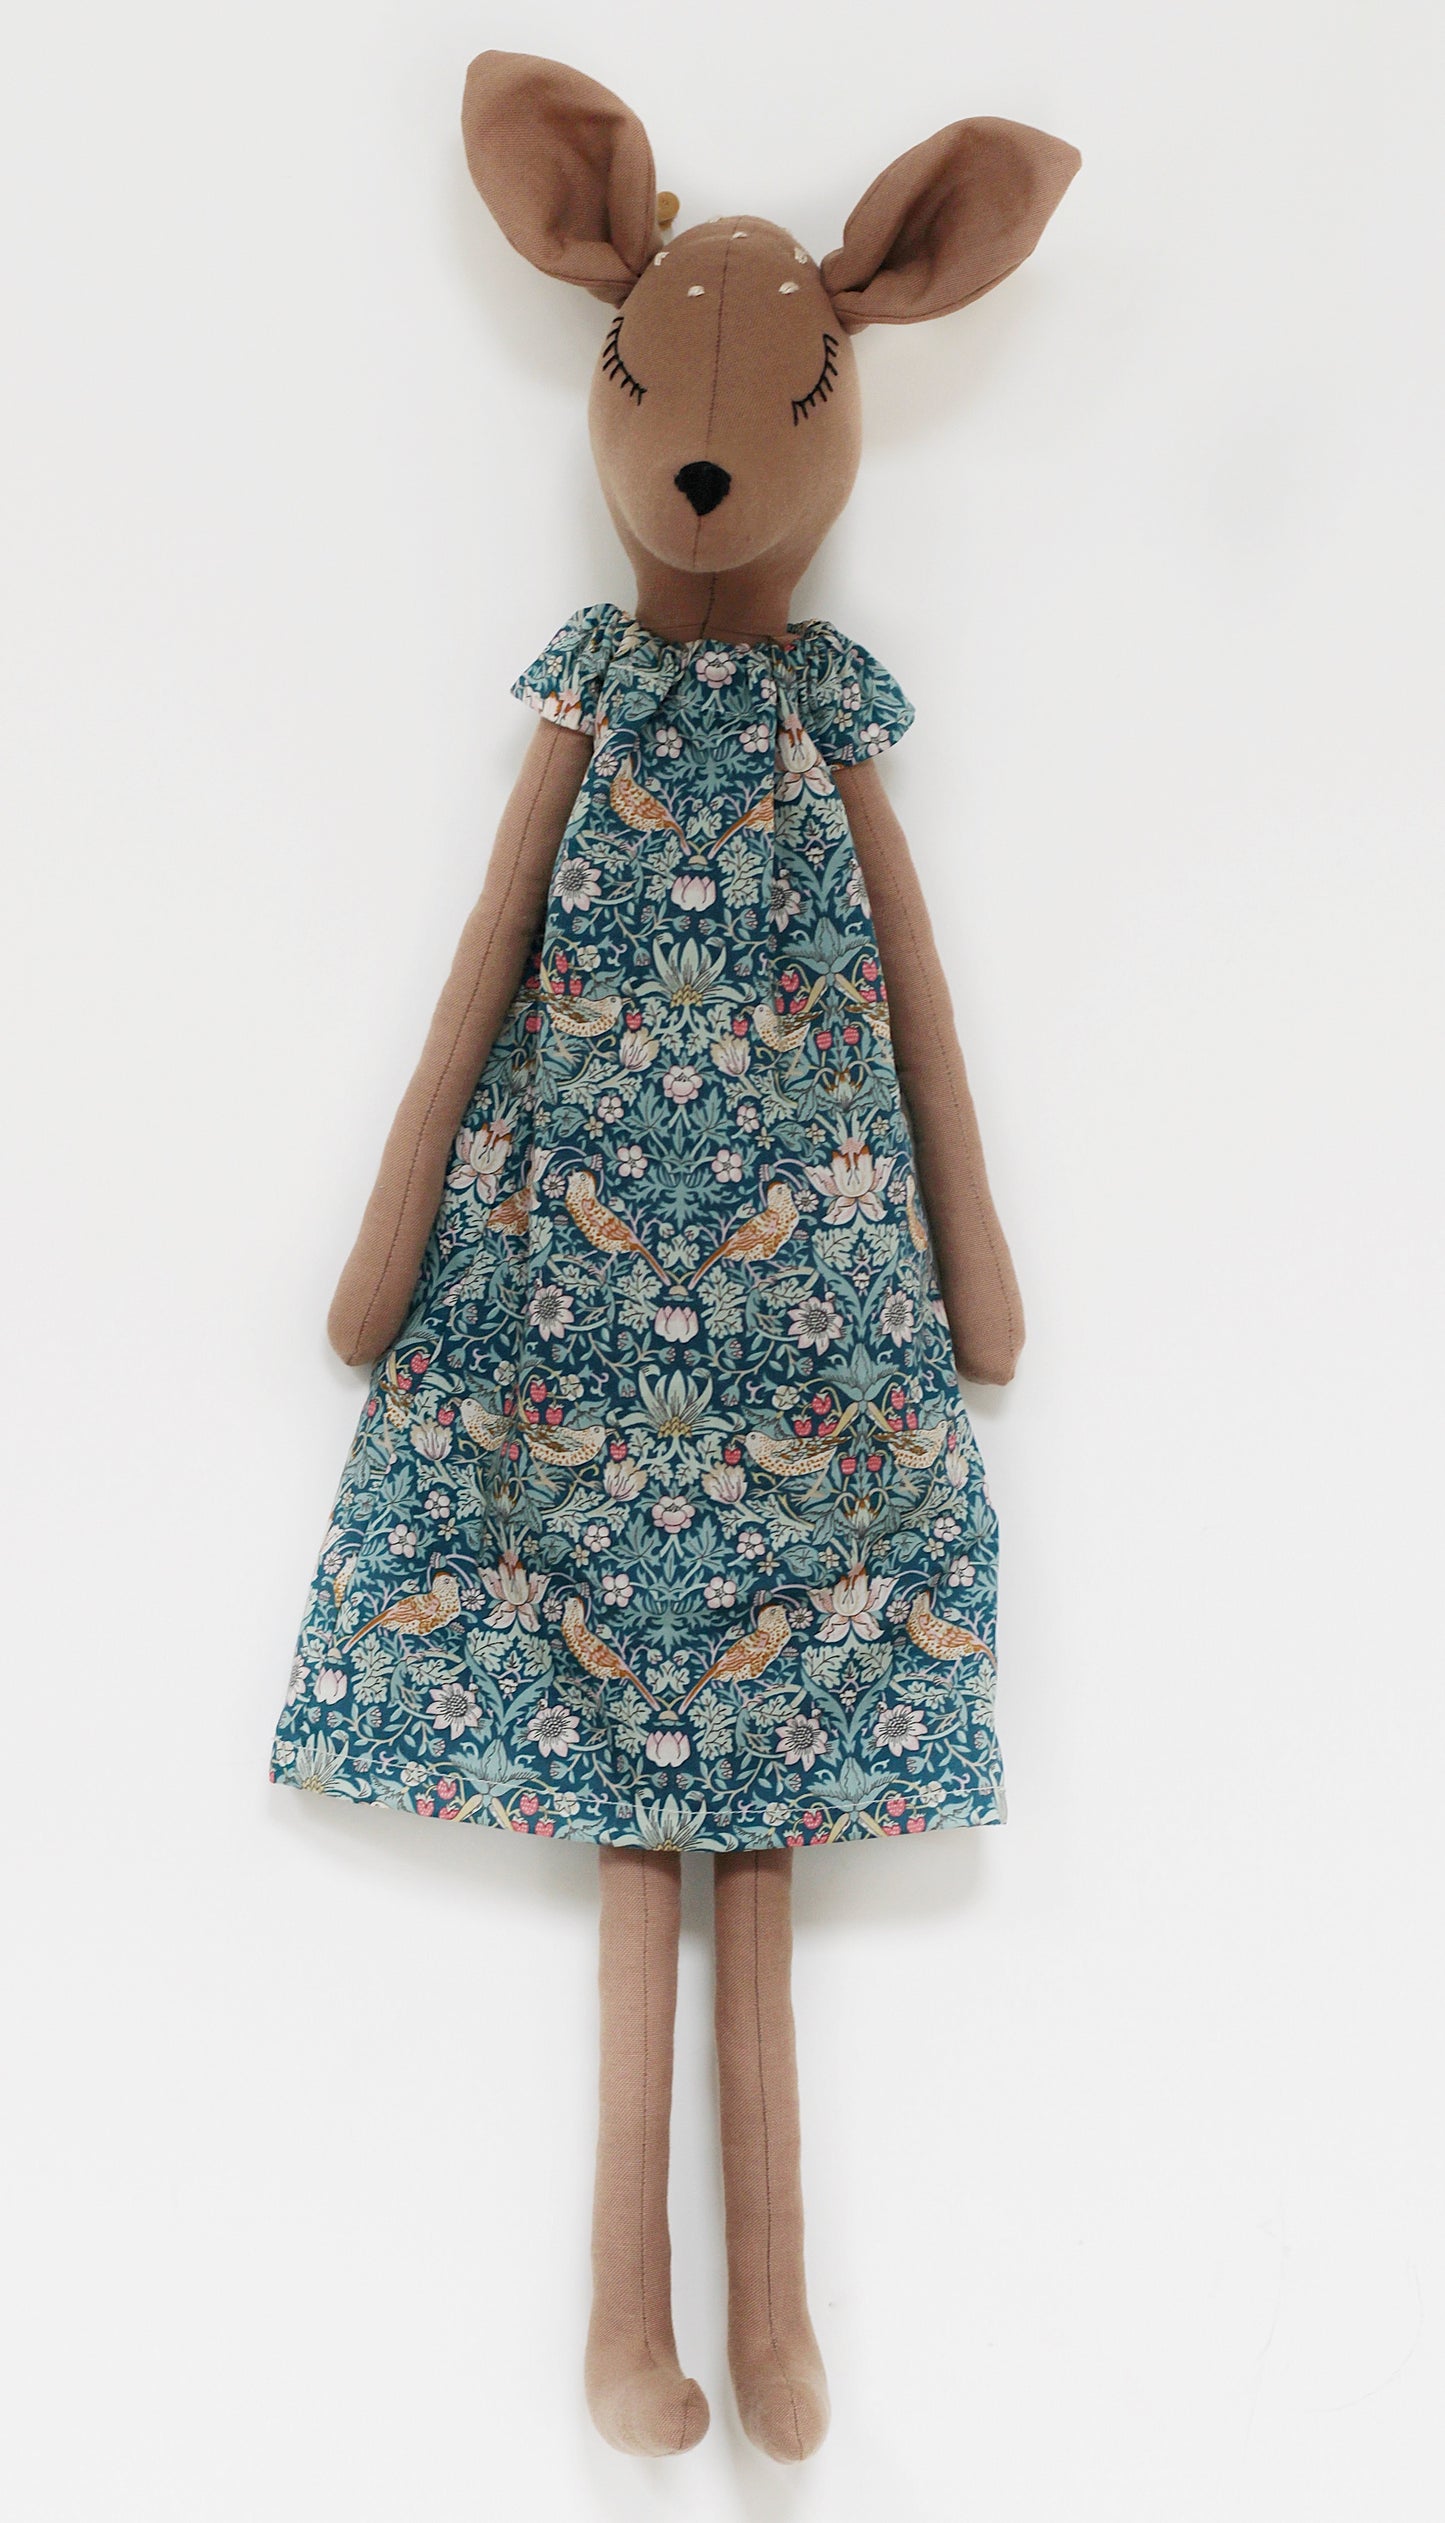 Strawberry thief Liberty fabric dress for 55 cm friends